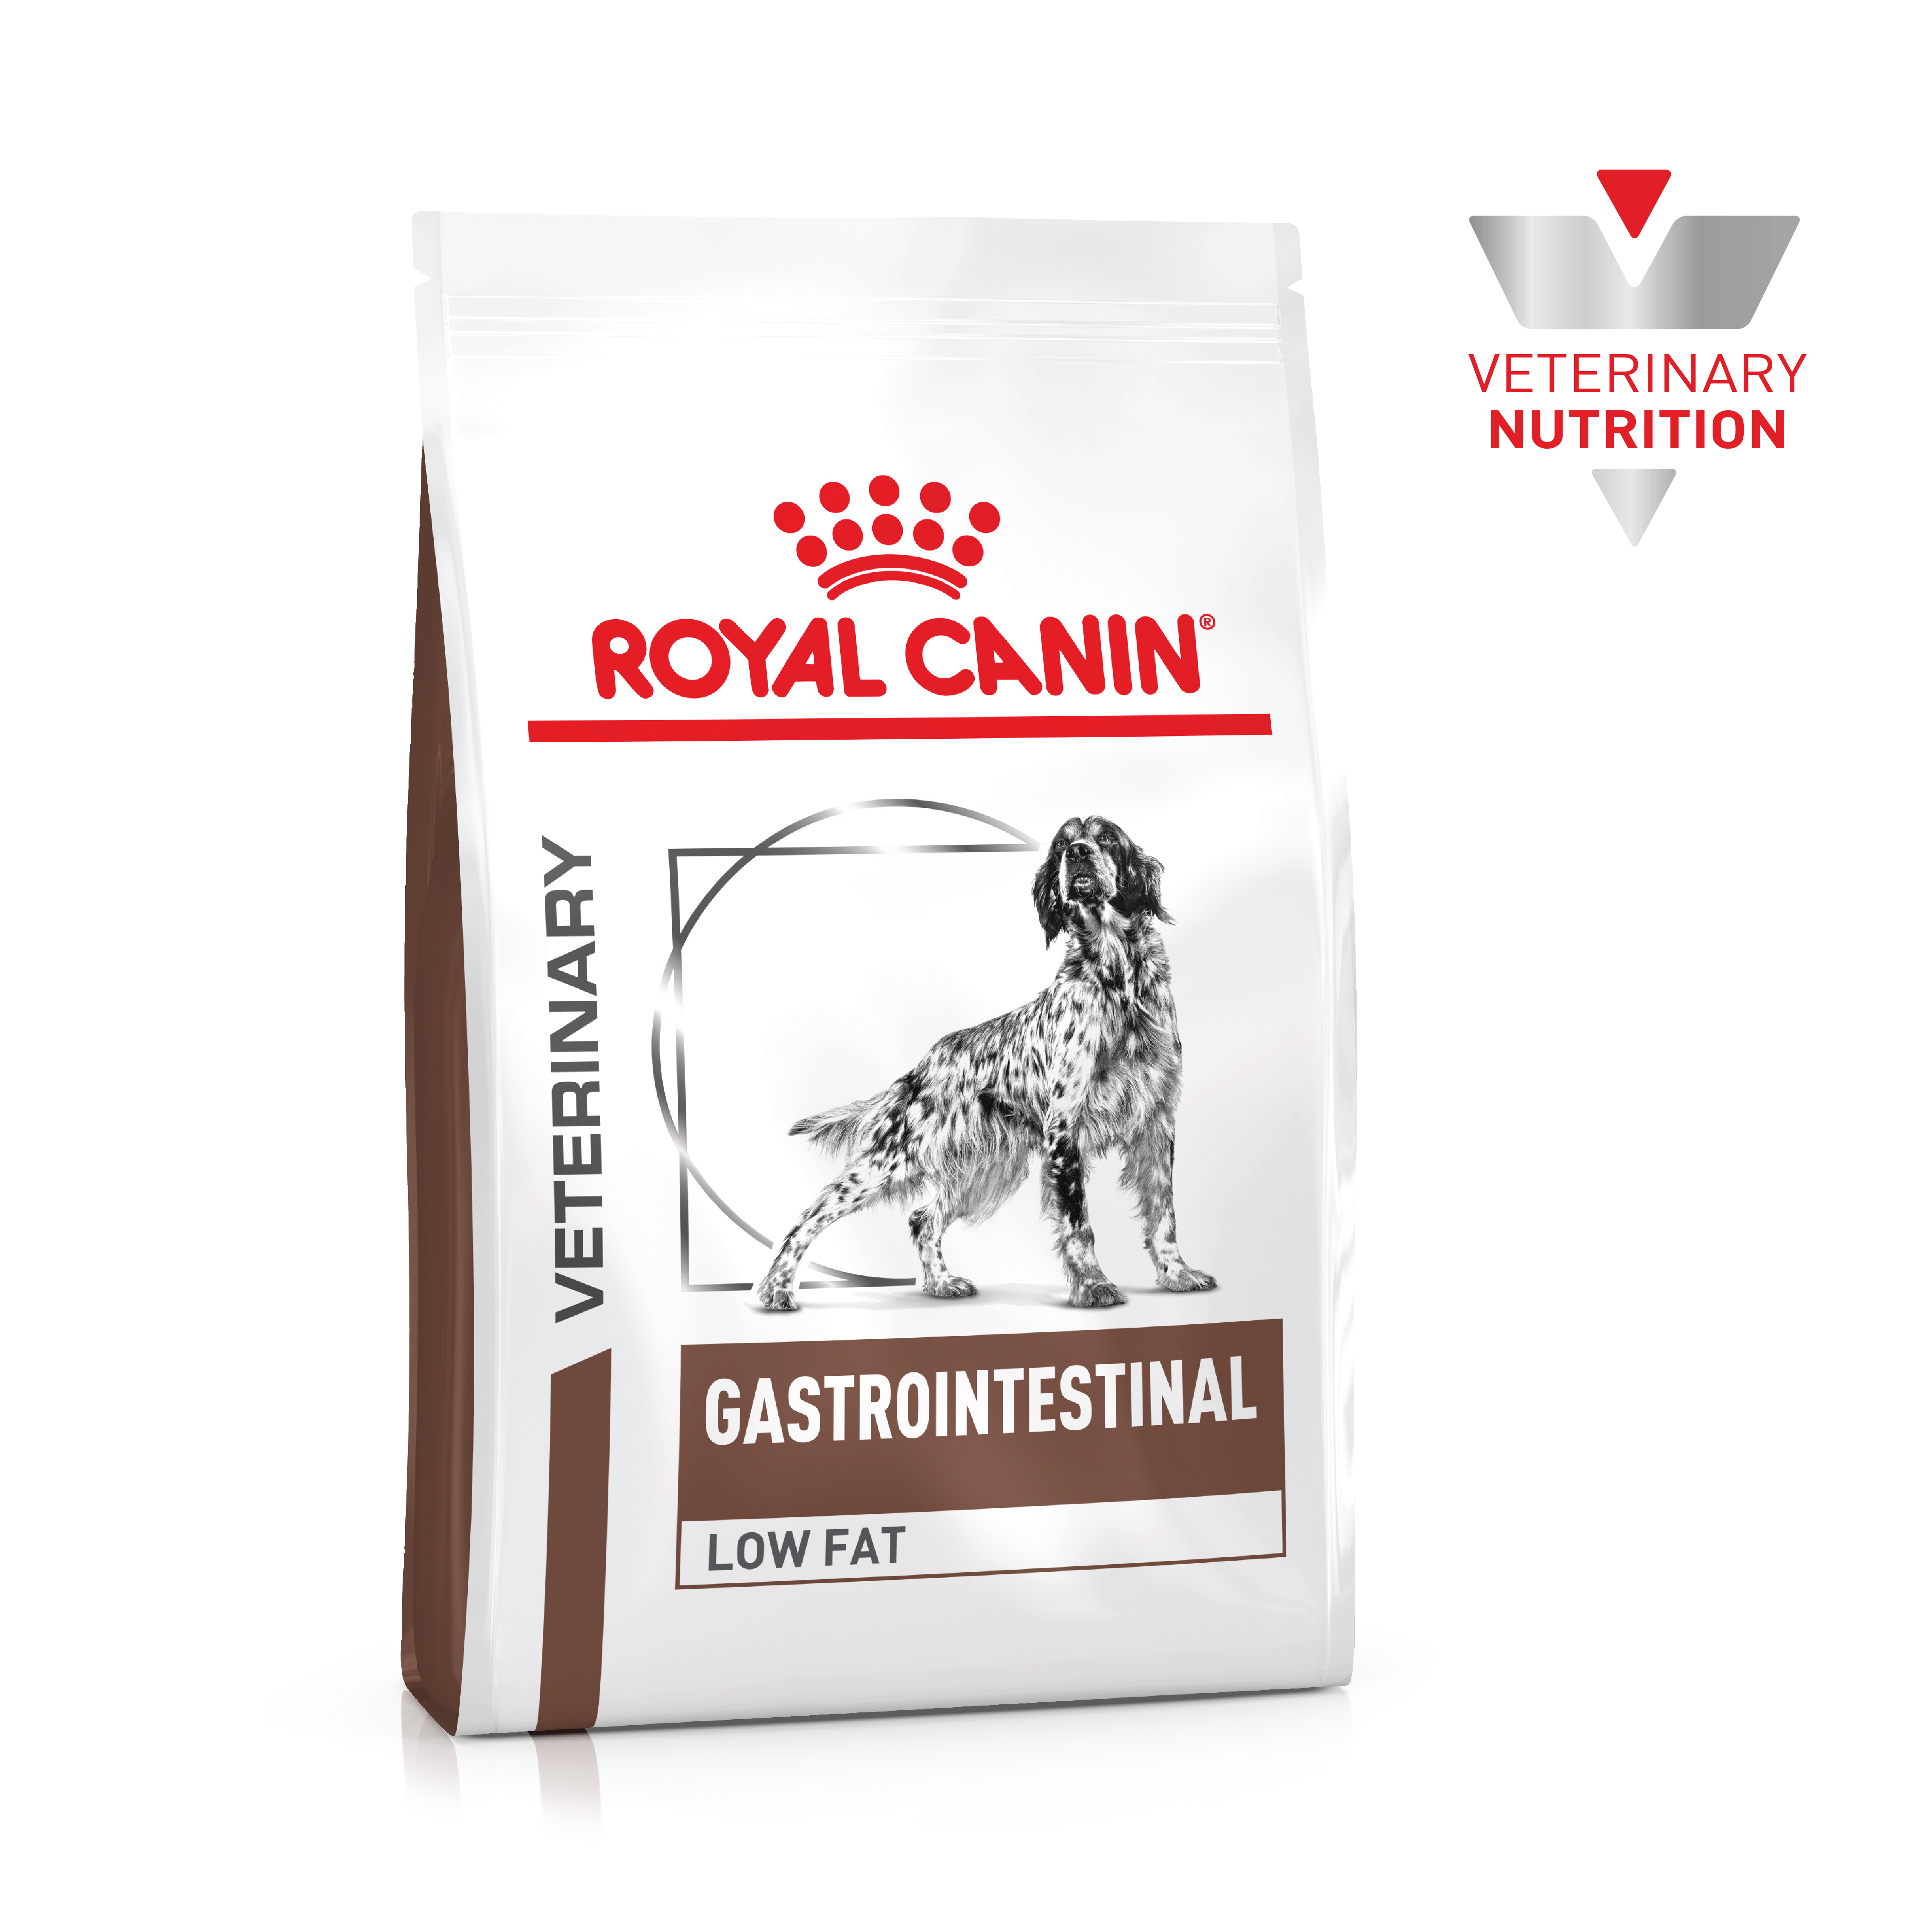 Royal Canin Gastro Intestinal Low Fat Veterinary Diet